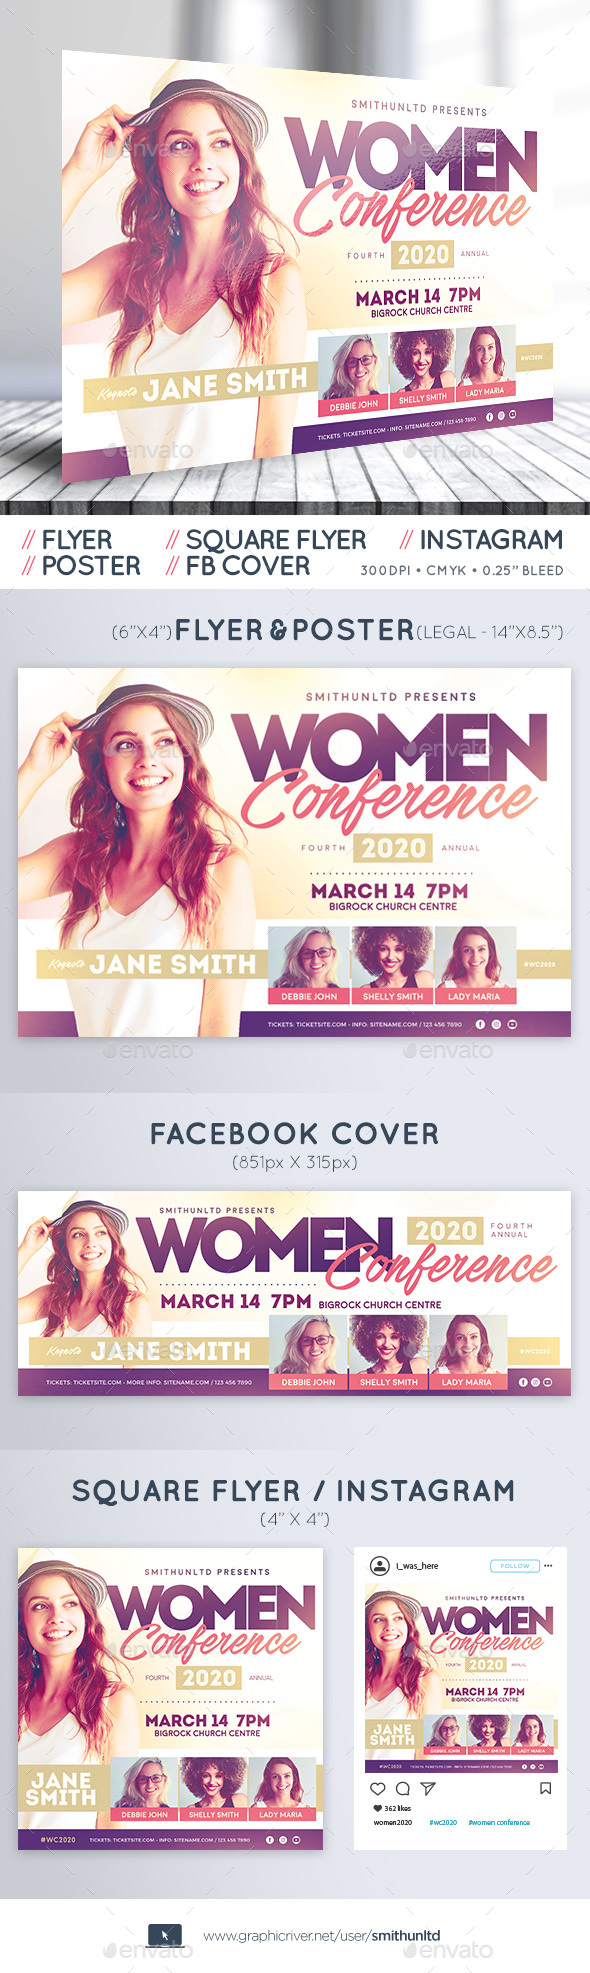 Women's Conference - Complete Set